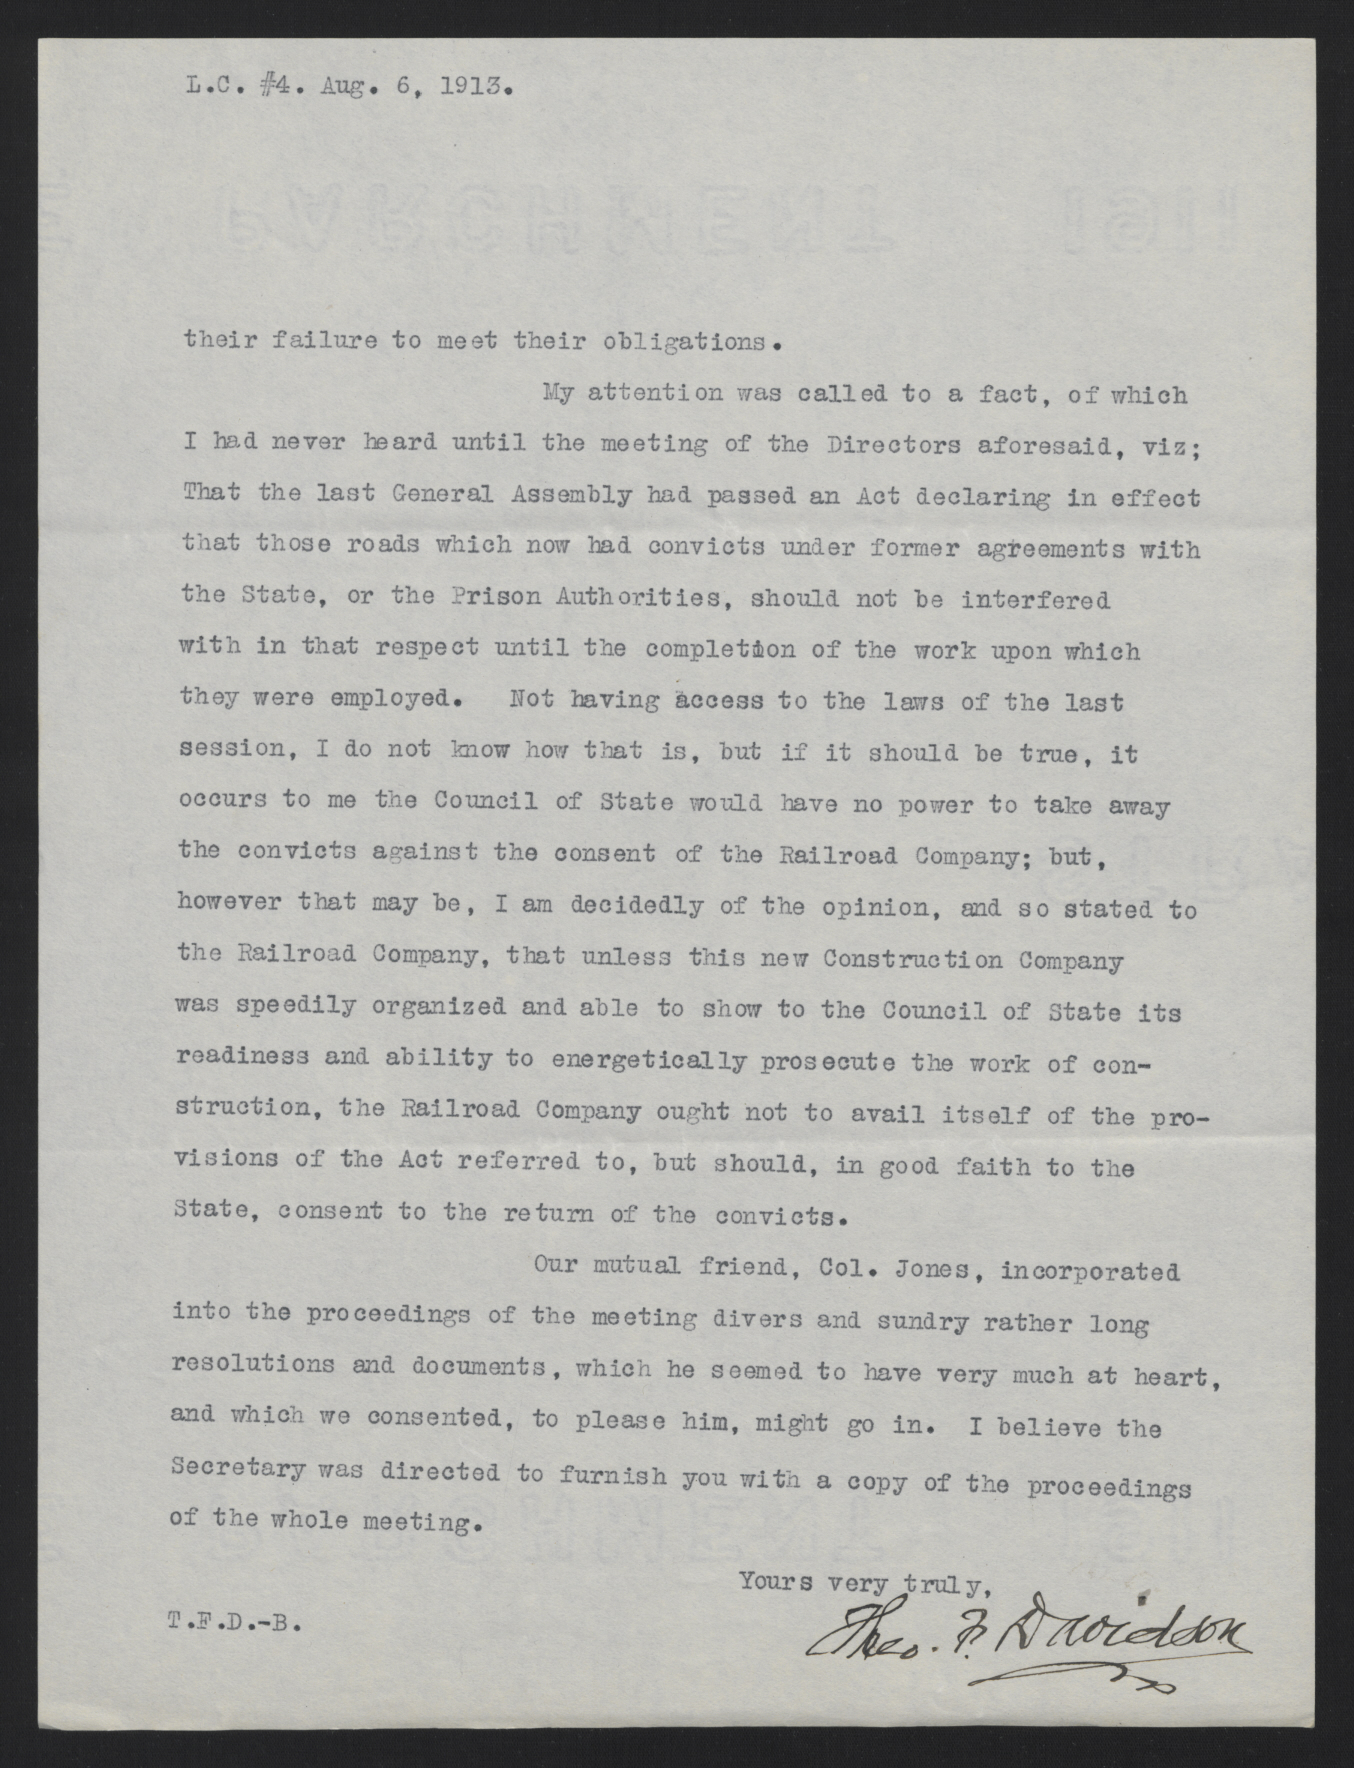 Letter from Davidson to Craig, August 6, 1913, page 4